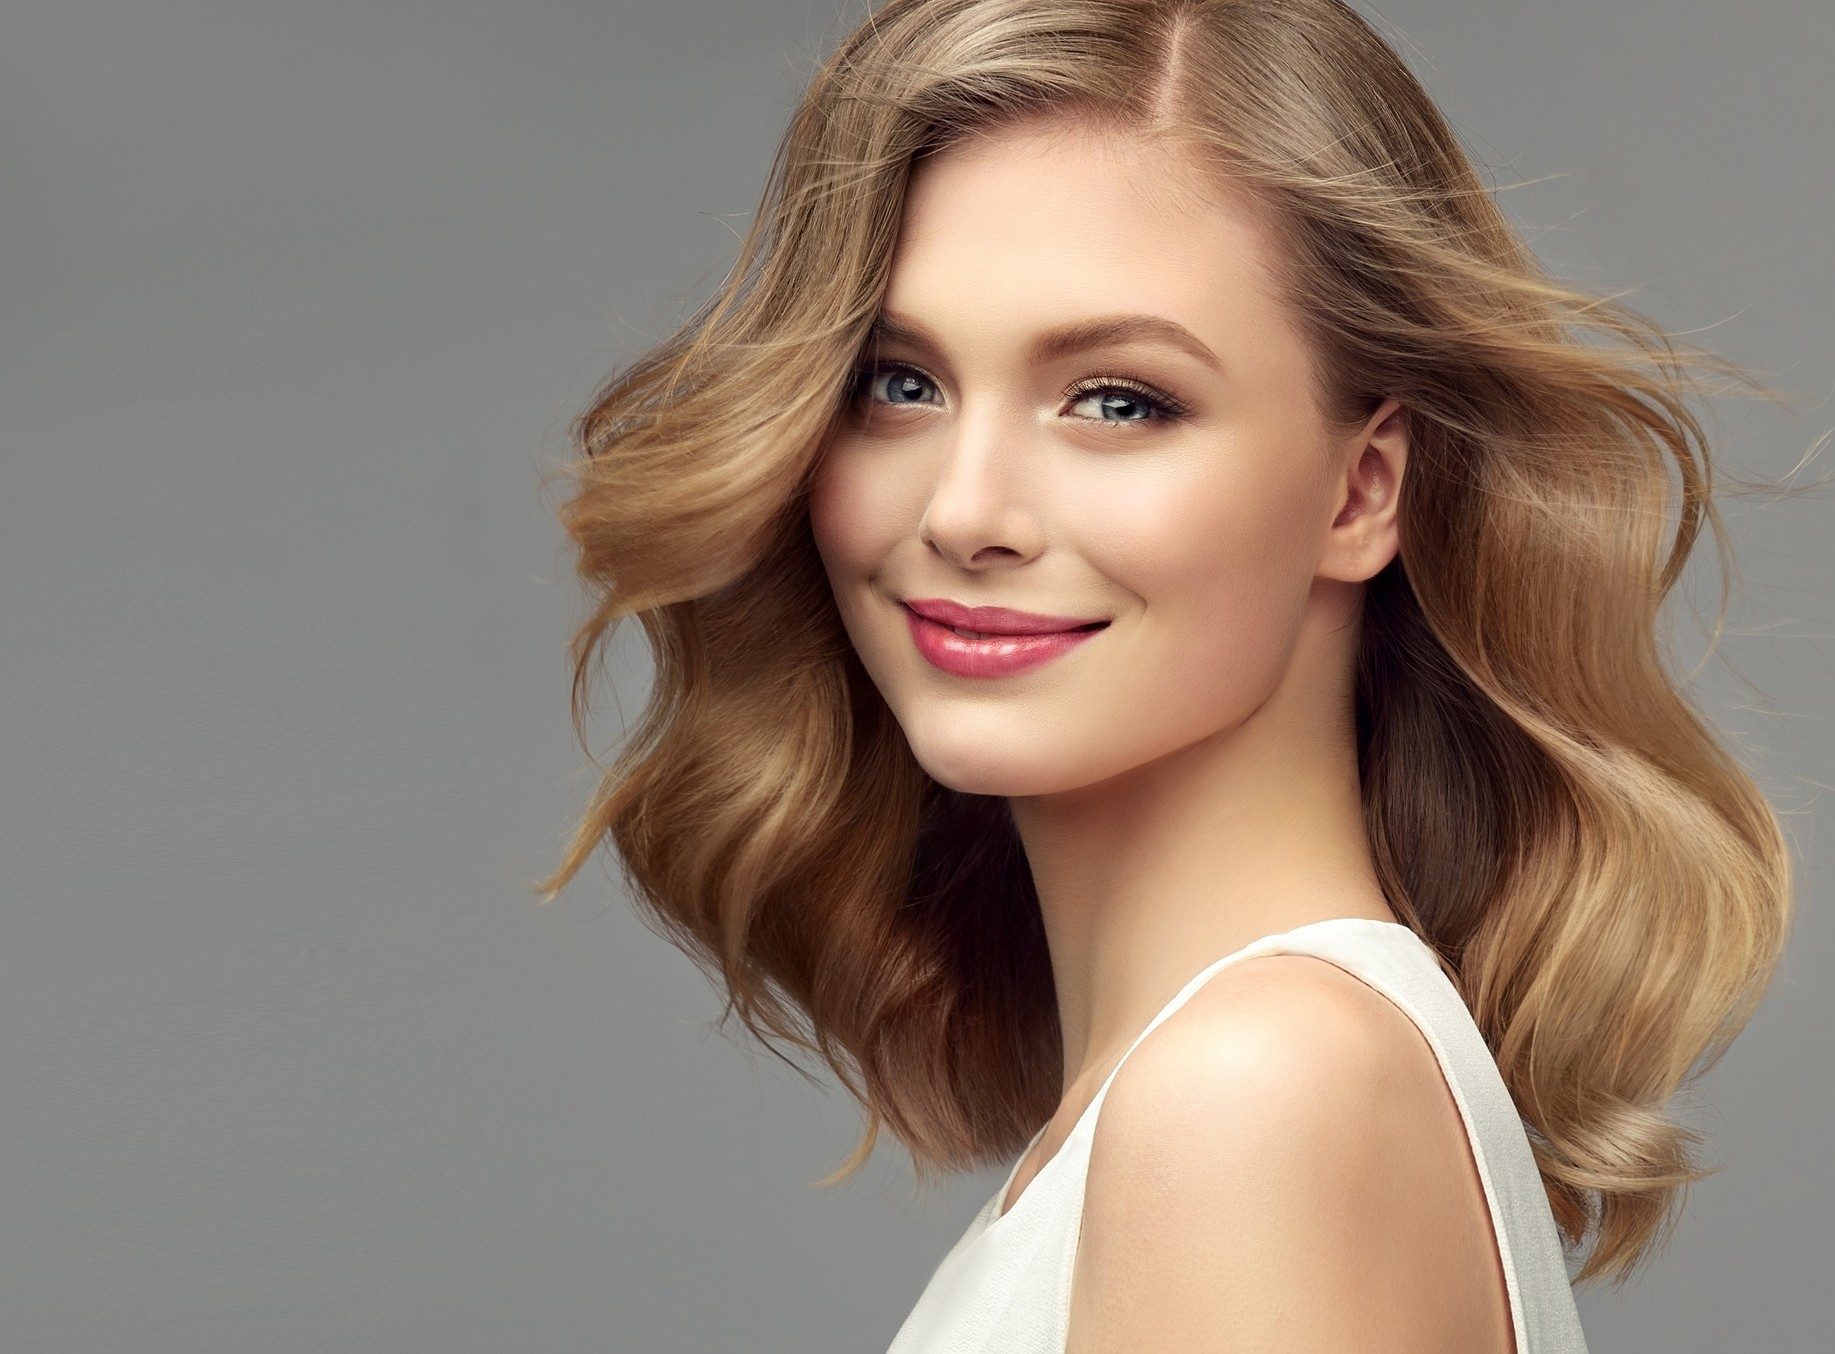 Model with dark blonde hair. Frizzy, elegant hairstyle is surrounding lovely face of tenderly smiling young woman. Natural gloss and softness of healthy hair. Hair care and hairdressing art.